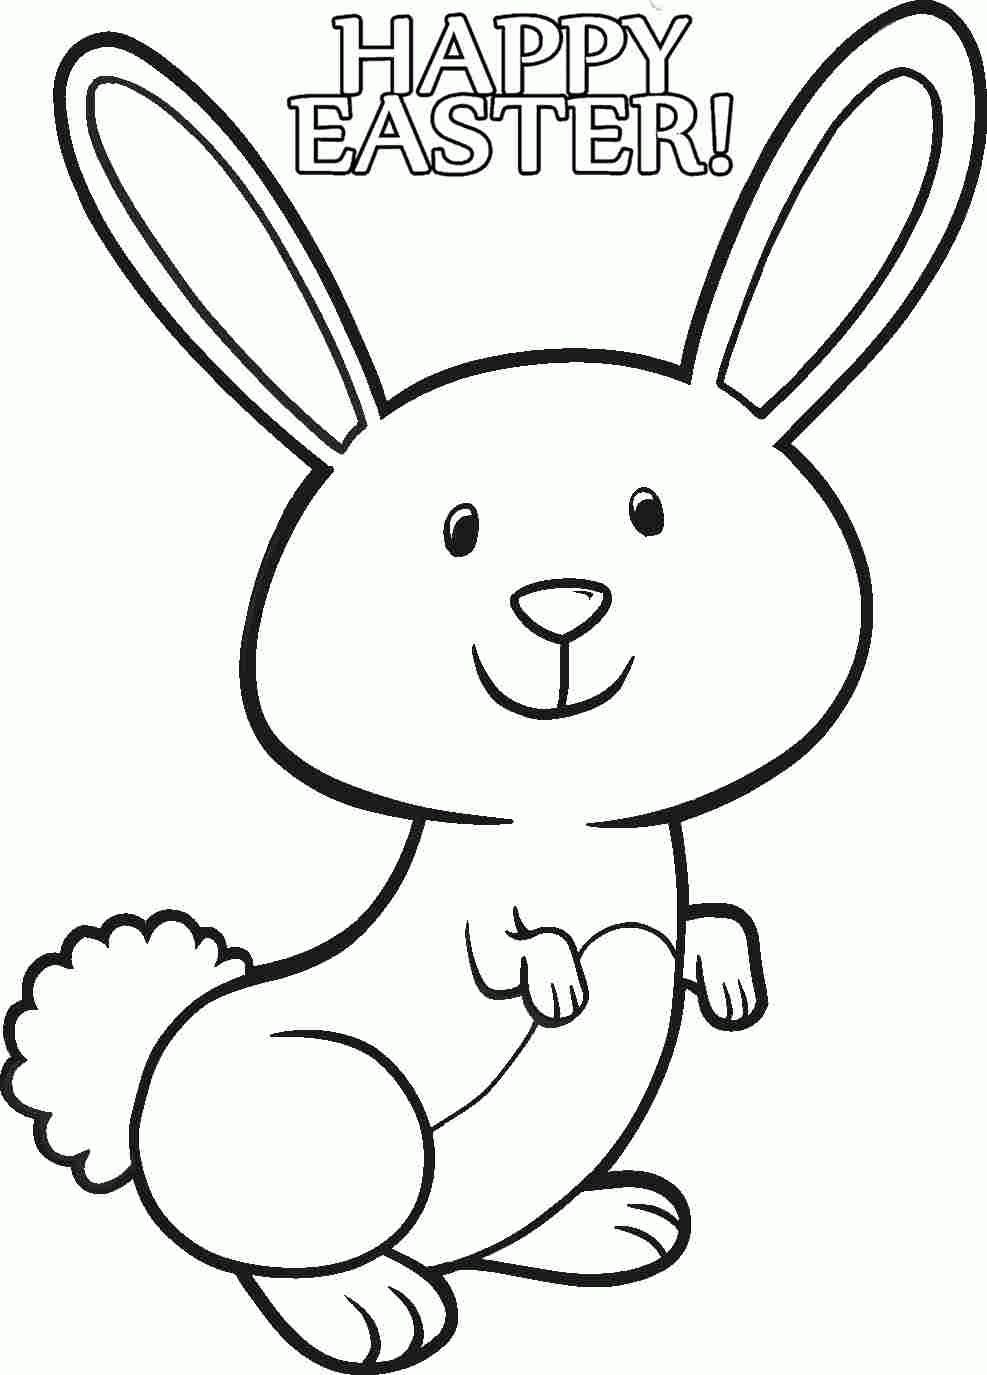 Bunny Coloring Pages For Girls | Coloring Online